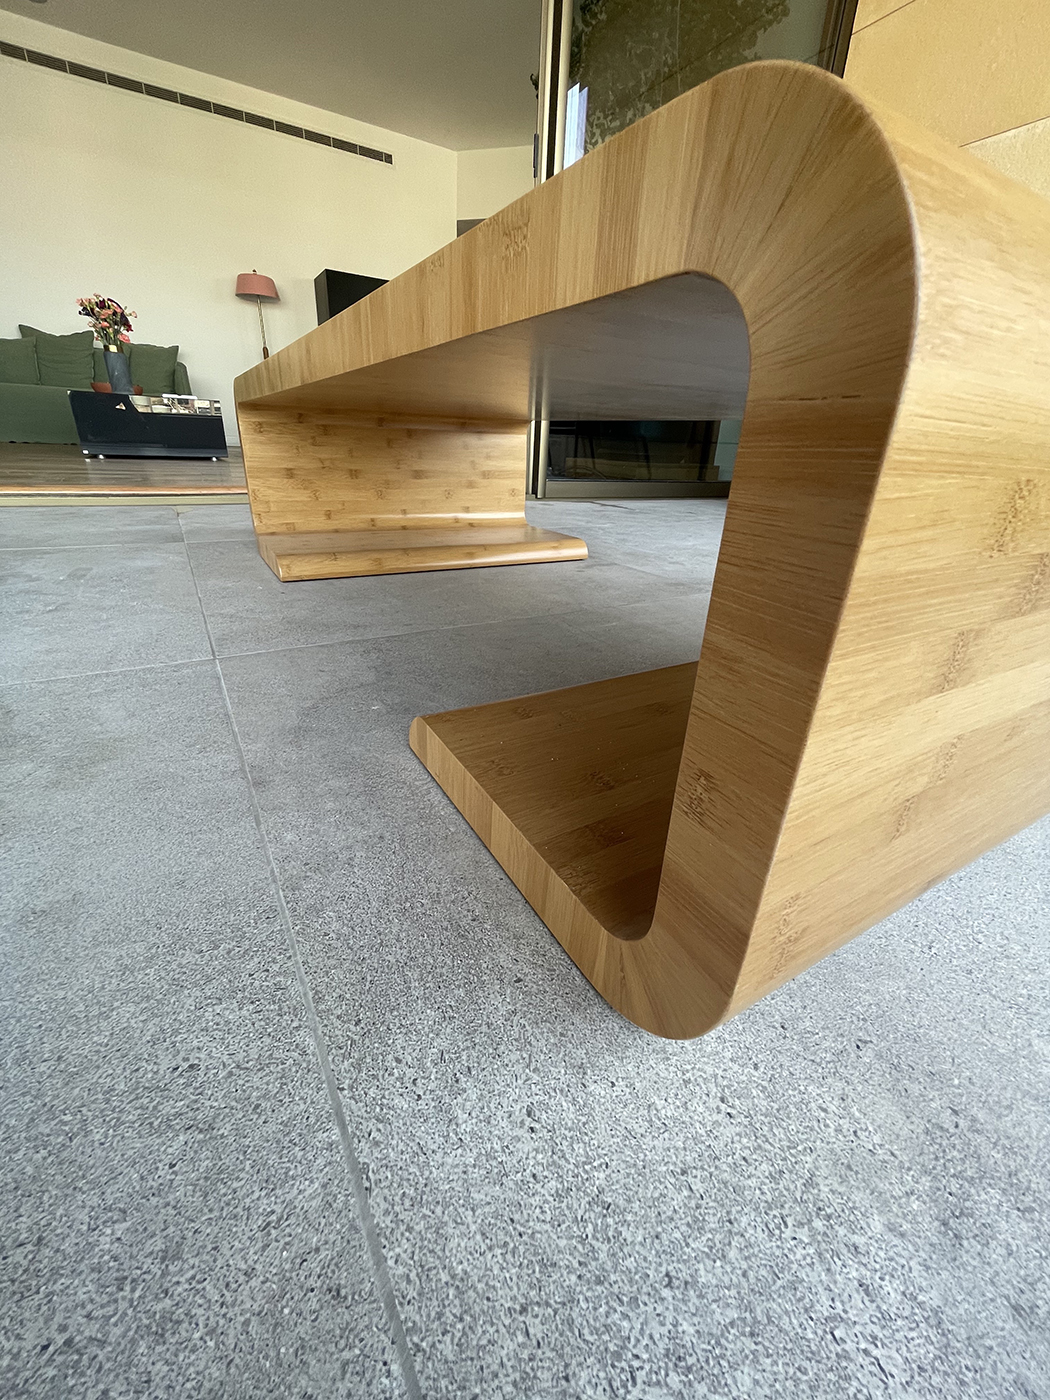 MDDM-Architects-Low-Table-furniture-product-design-bamboo-wood-studio